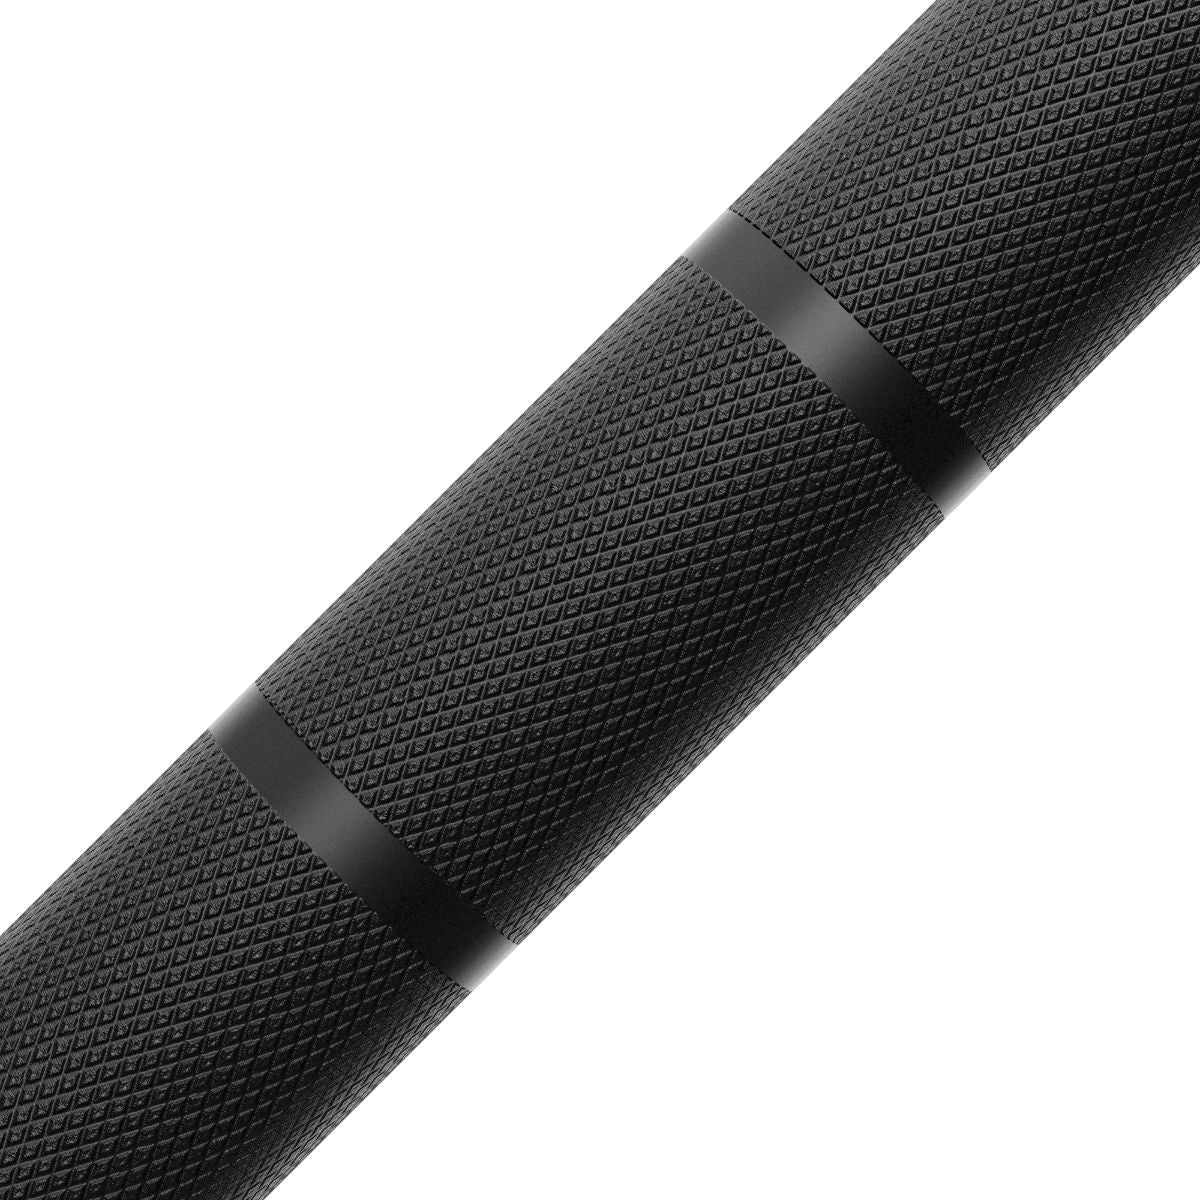 Black 7ft Olympic barbell IWF standard knurling 1,000lb max load - Cannons UK